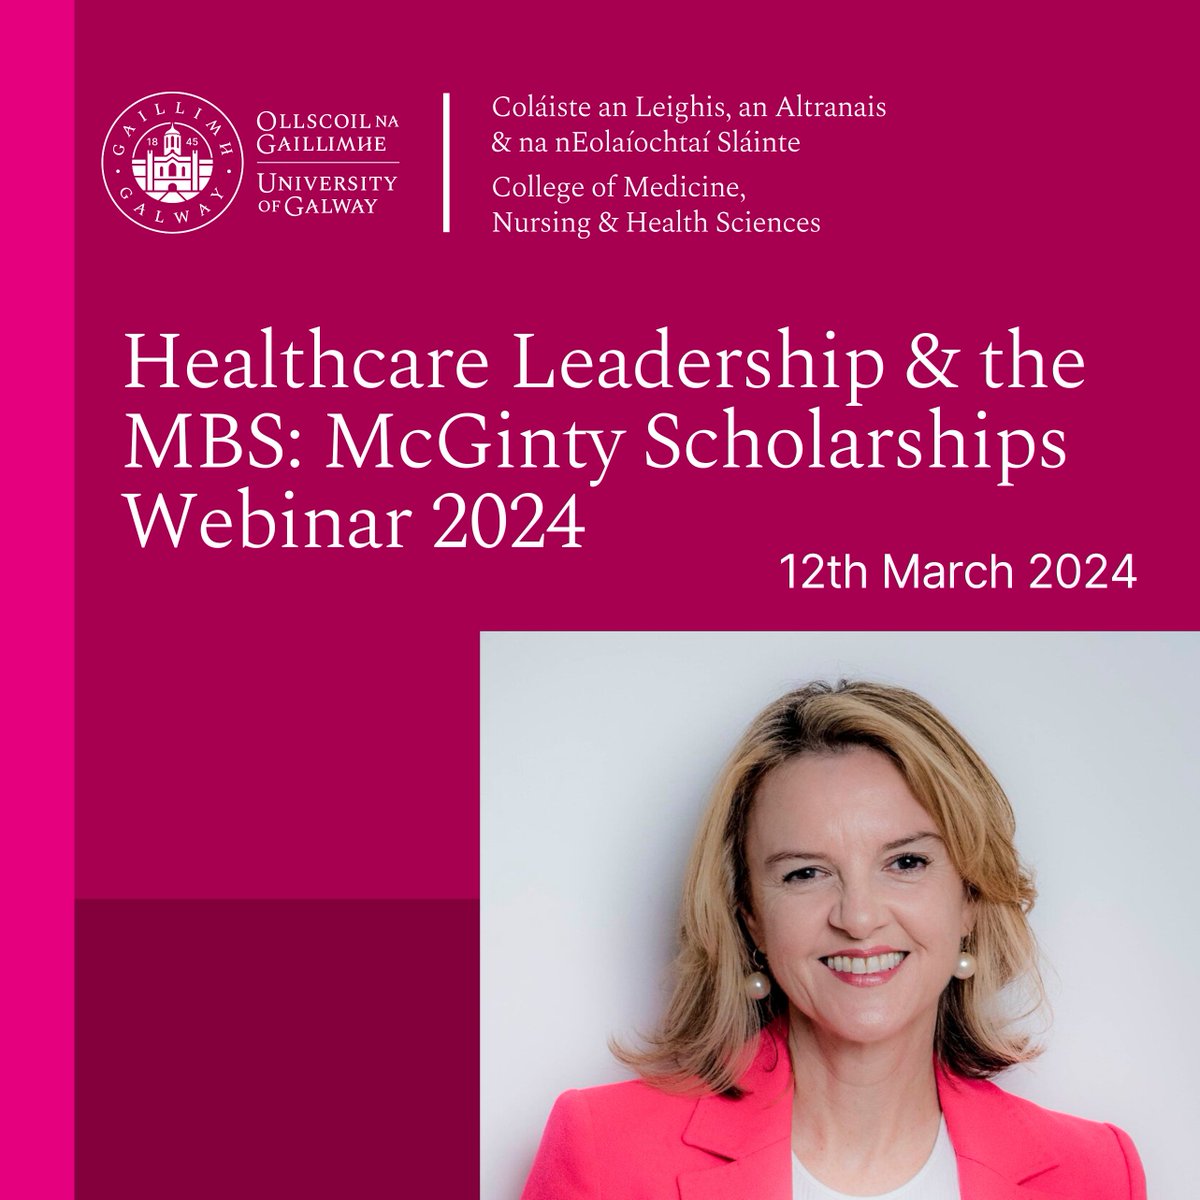 Healthcare Leadership & the MBA: A Webinar Launching the McGinty Scholarships 2024 Join us on 12th March at 6pm to launch the 2024 McGinty Scholarships for Female Physicians and Allied Health Professionals Find out more: stories.universityofgalway.ie/healthcare-lea…